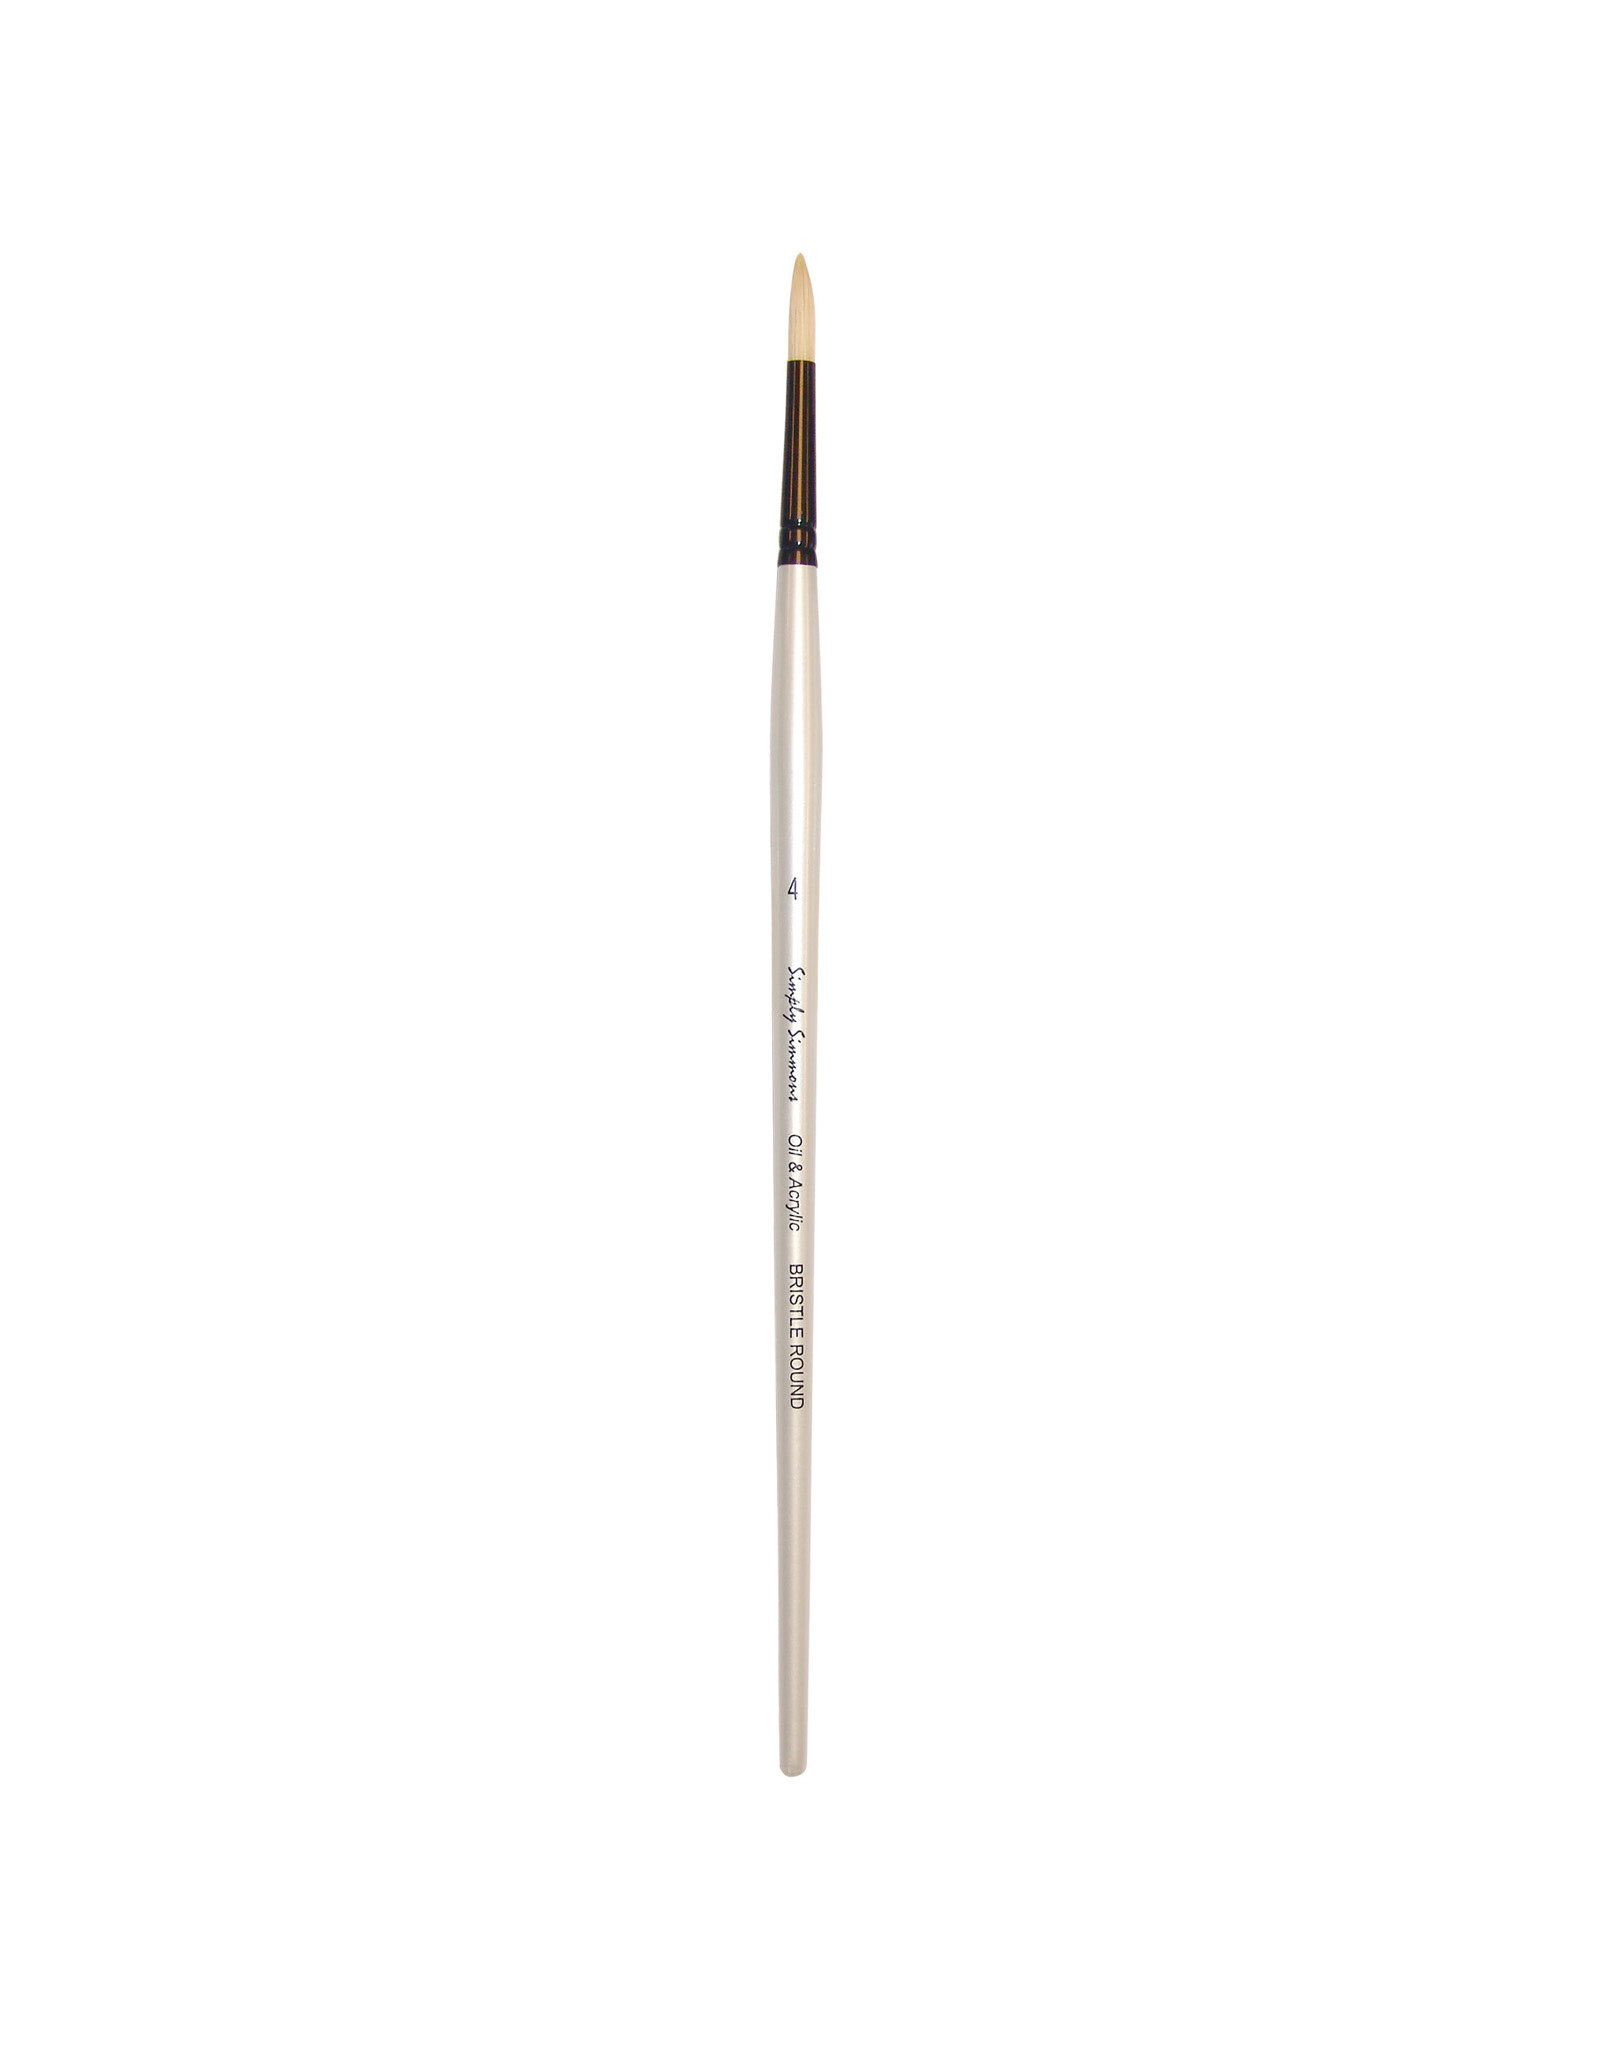 Daler-Rowney Simply Simmons Long Handle Bristle Round # 4